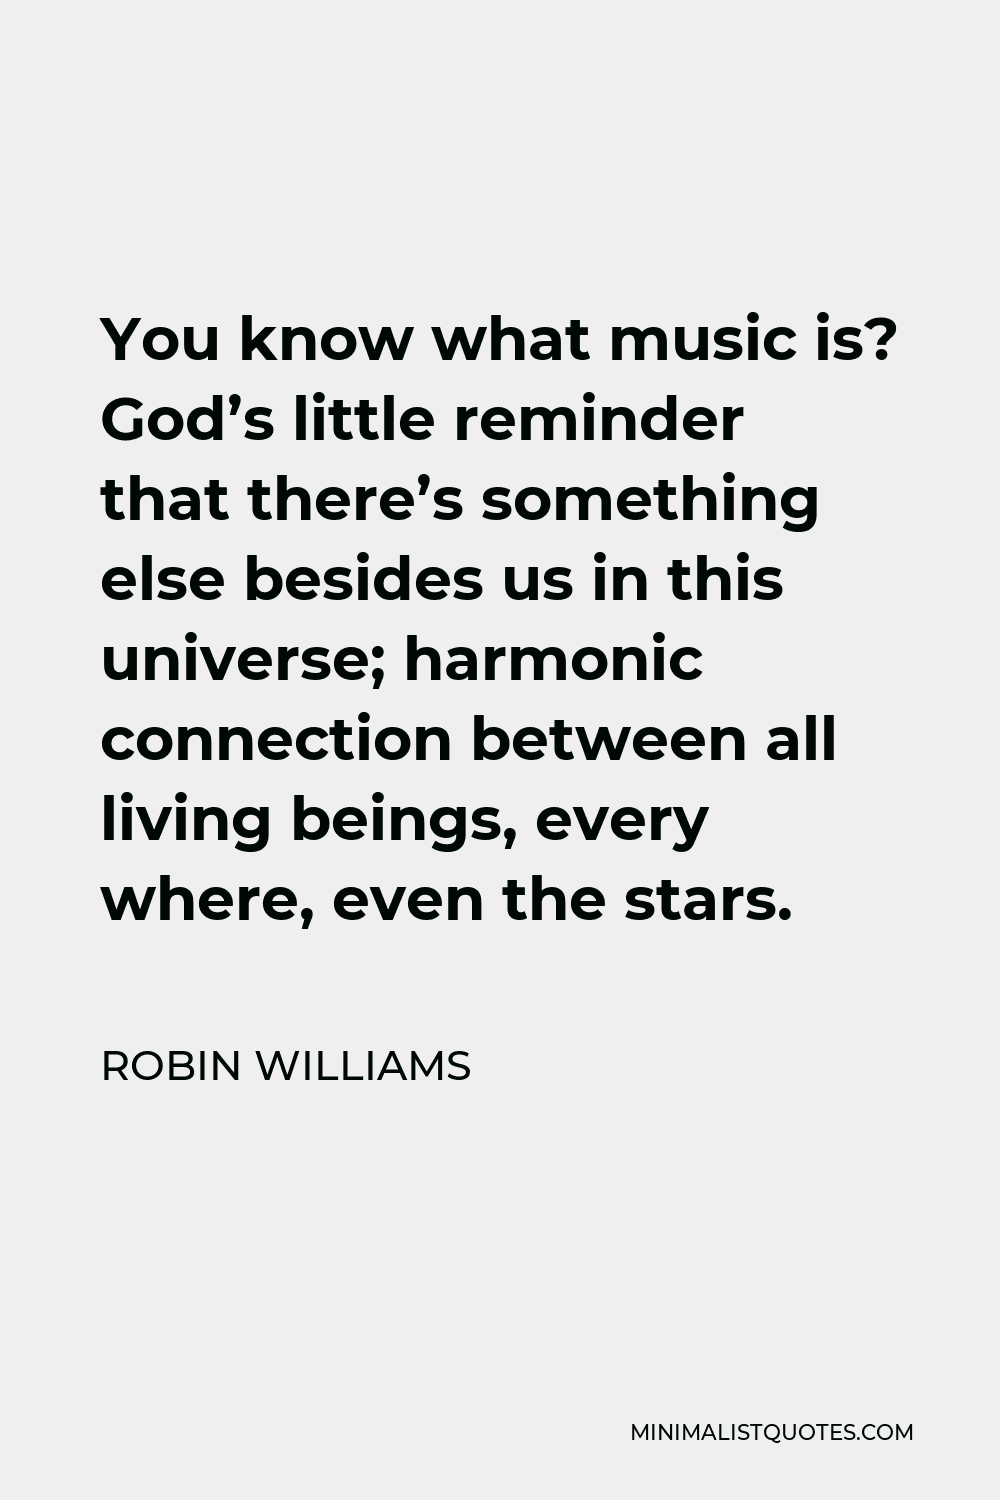 Robin Williams Quote - You know what music is? God’s little reminder that there’s something else besides us in this universe; harmonic connection between all living beings, every where, even the stars.